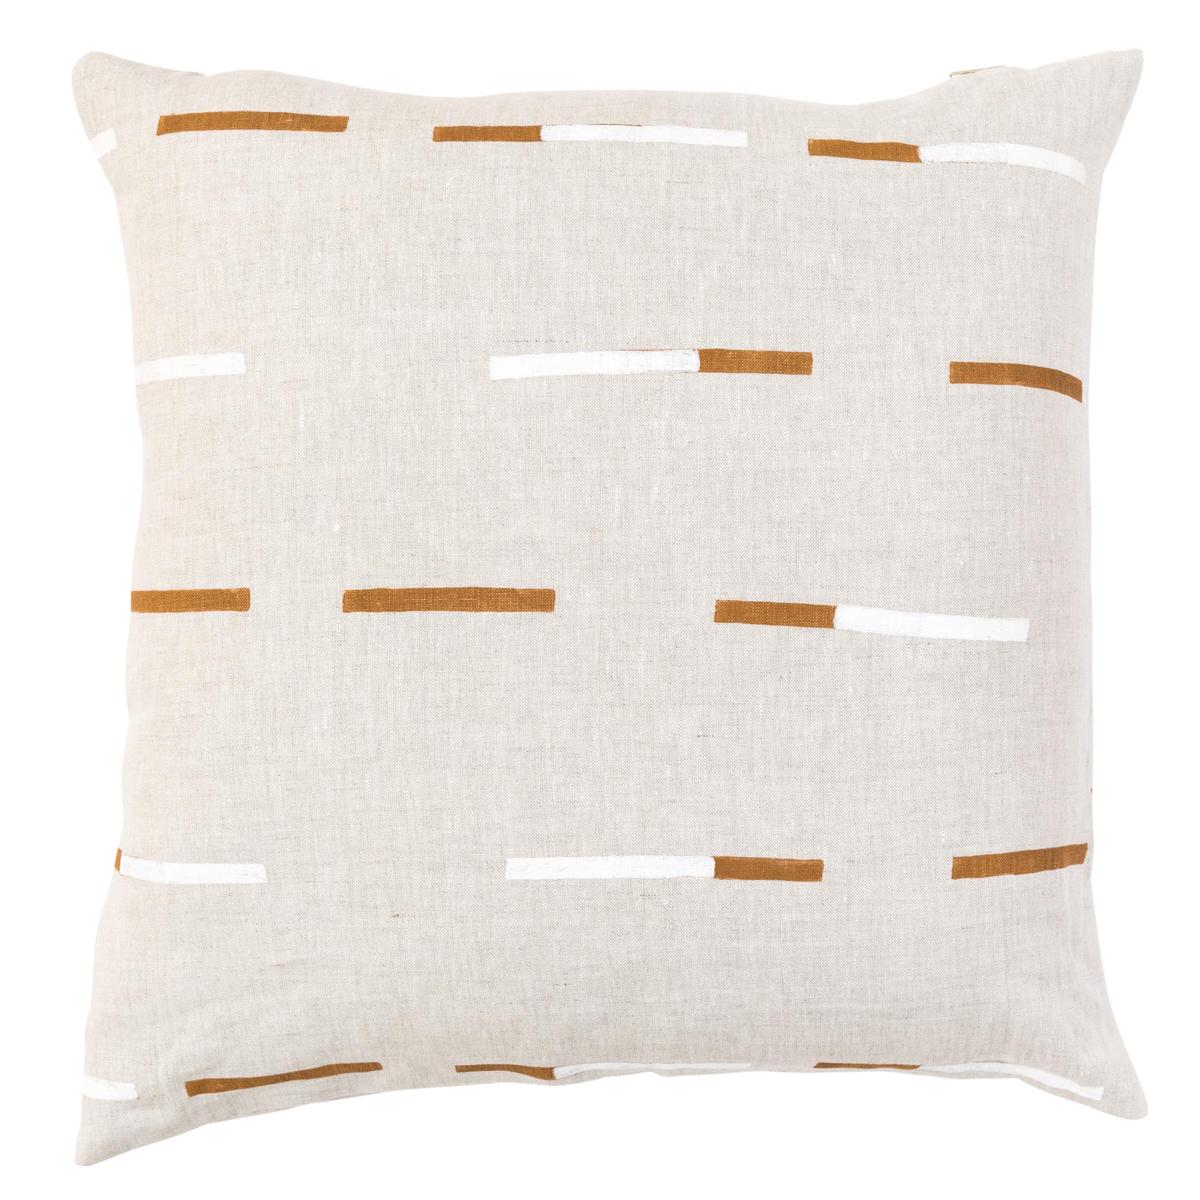 Overlapping Dashes Pillow_BROWN & WHITE